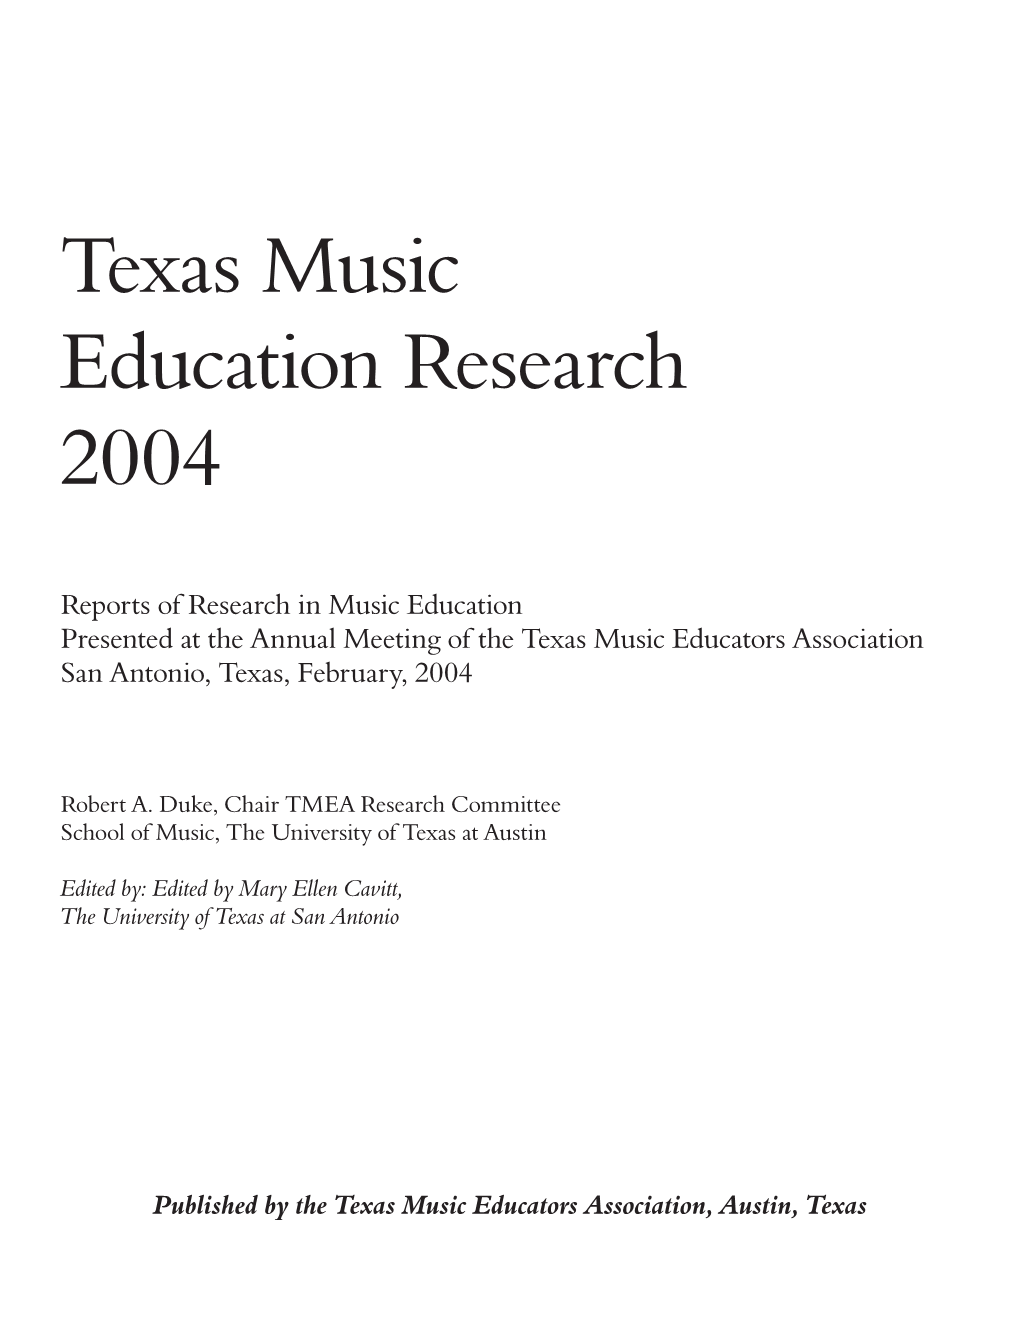 Texas Music Education Research 2004